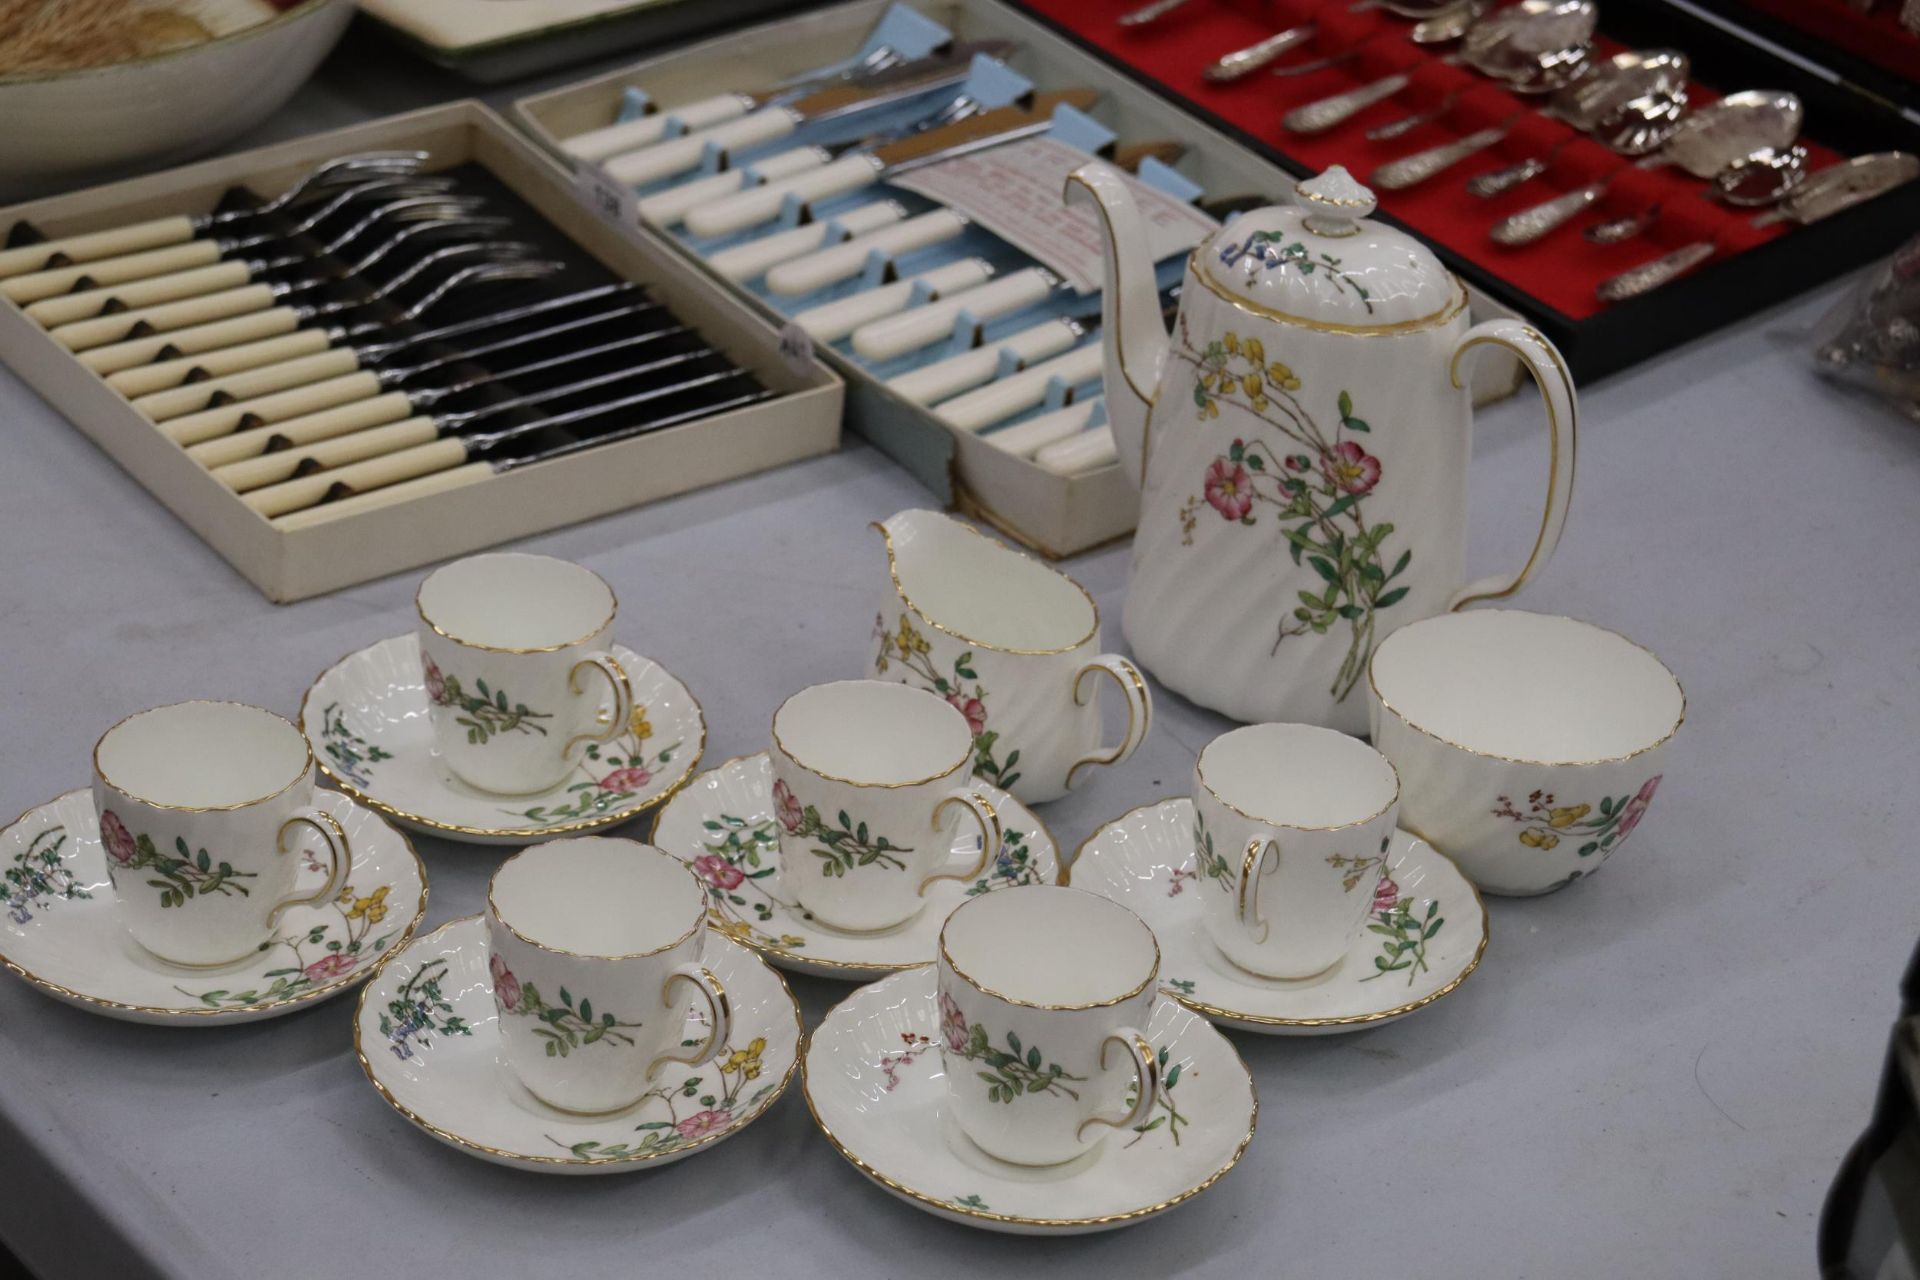 A MINTON 'DAINTY SPRAYS' COFFEE SET TO INCLUDE A COFFEE POT, CREAM JUG, SUGAR BOWL, CUPS AND SAUCERS - Image 3 of 9